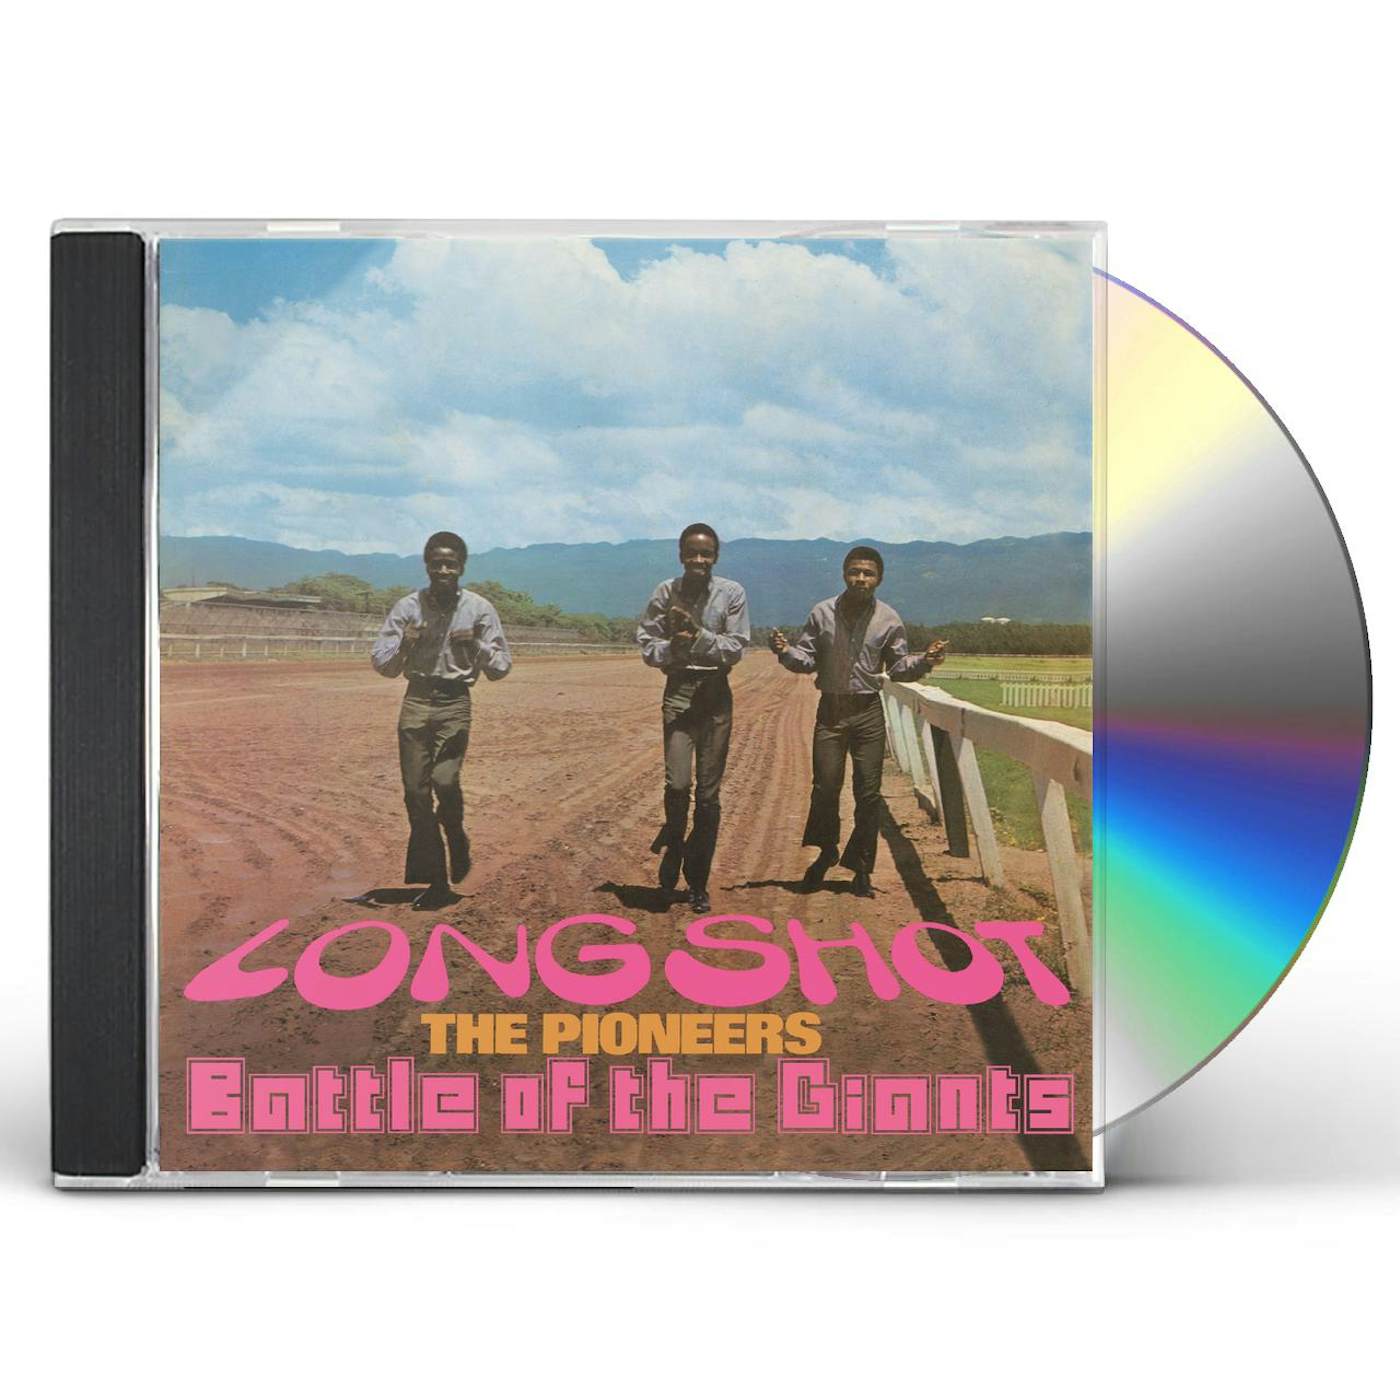 The Pioneers LONG SHOT / BATTLE OF THE GIANTS CD